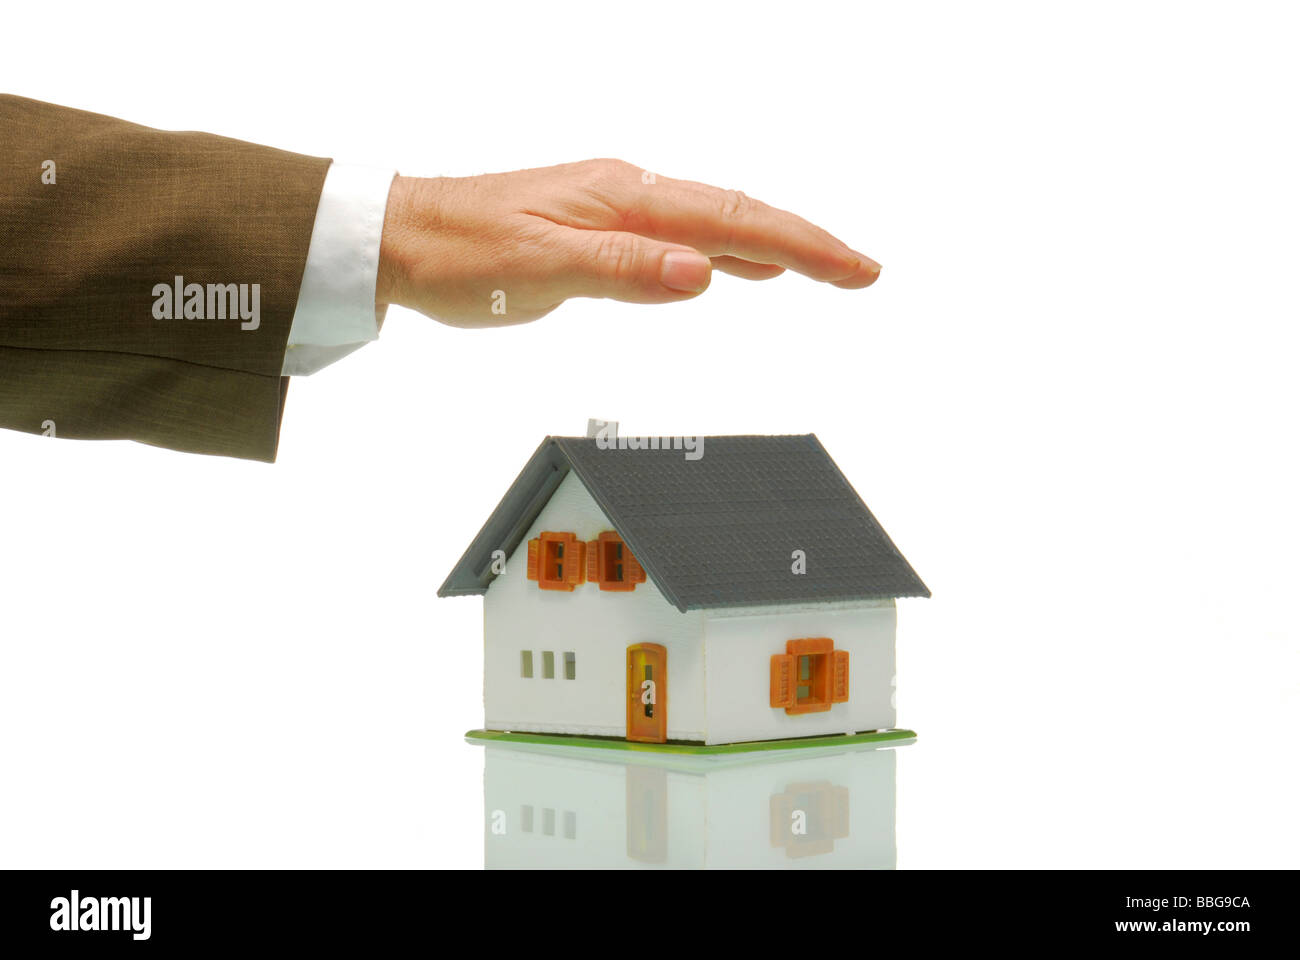 Business man holding hand over model house, symbolic of protection Stock Photo